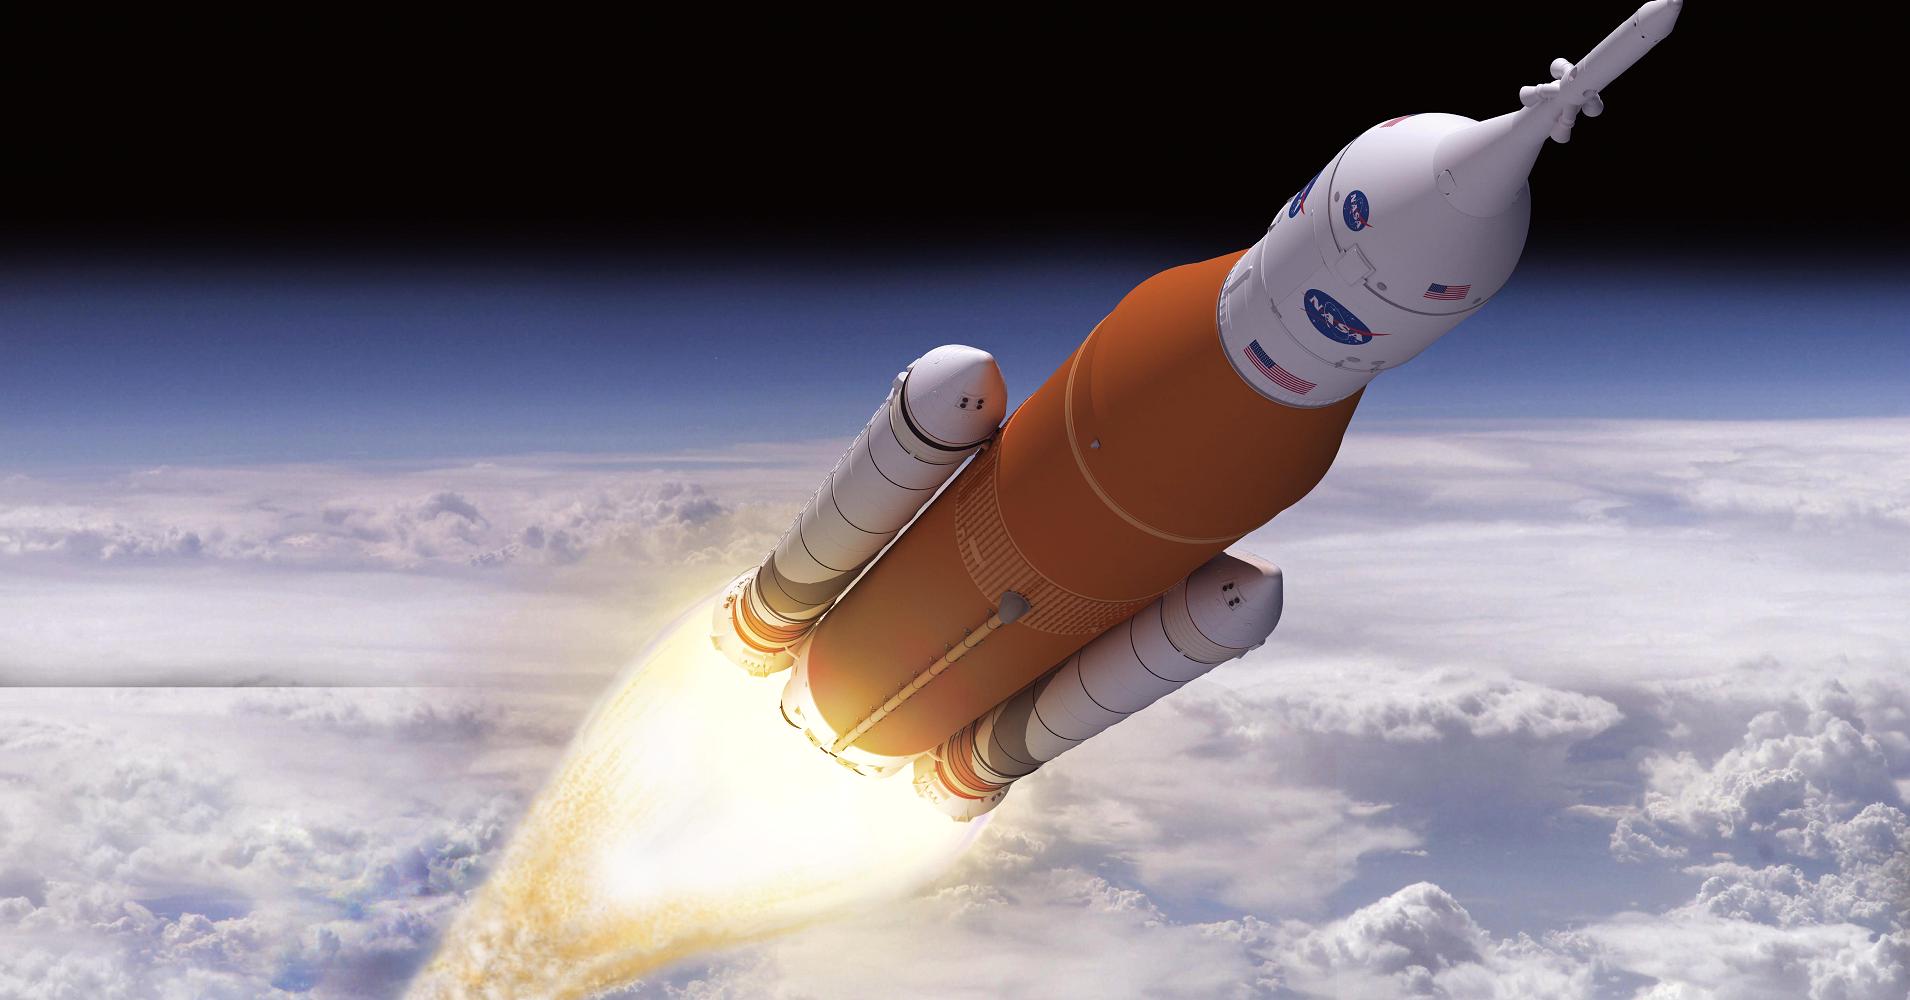 The Boeing company intends to overtake SpaceX and the first to land people on Mars